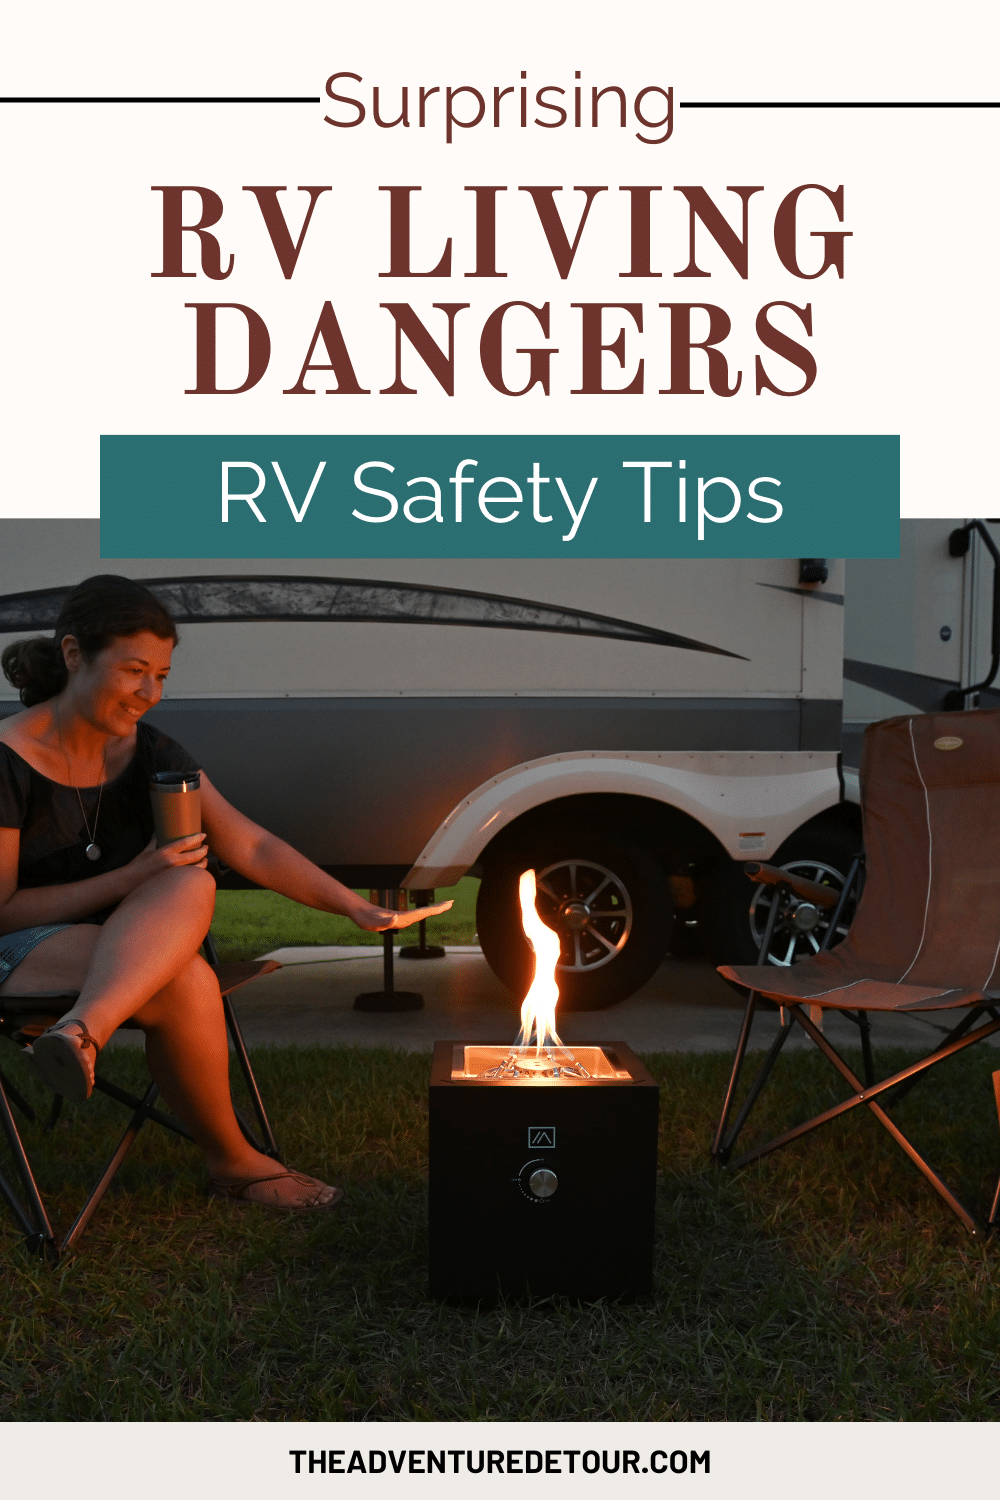 Woman having a campfire in front of RV